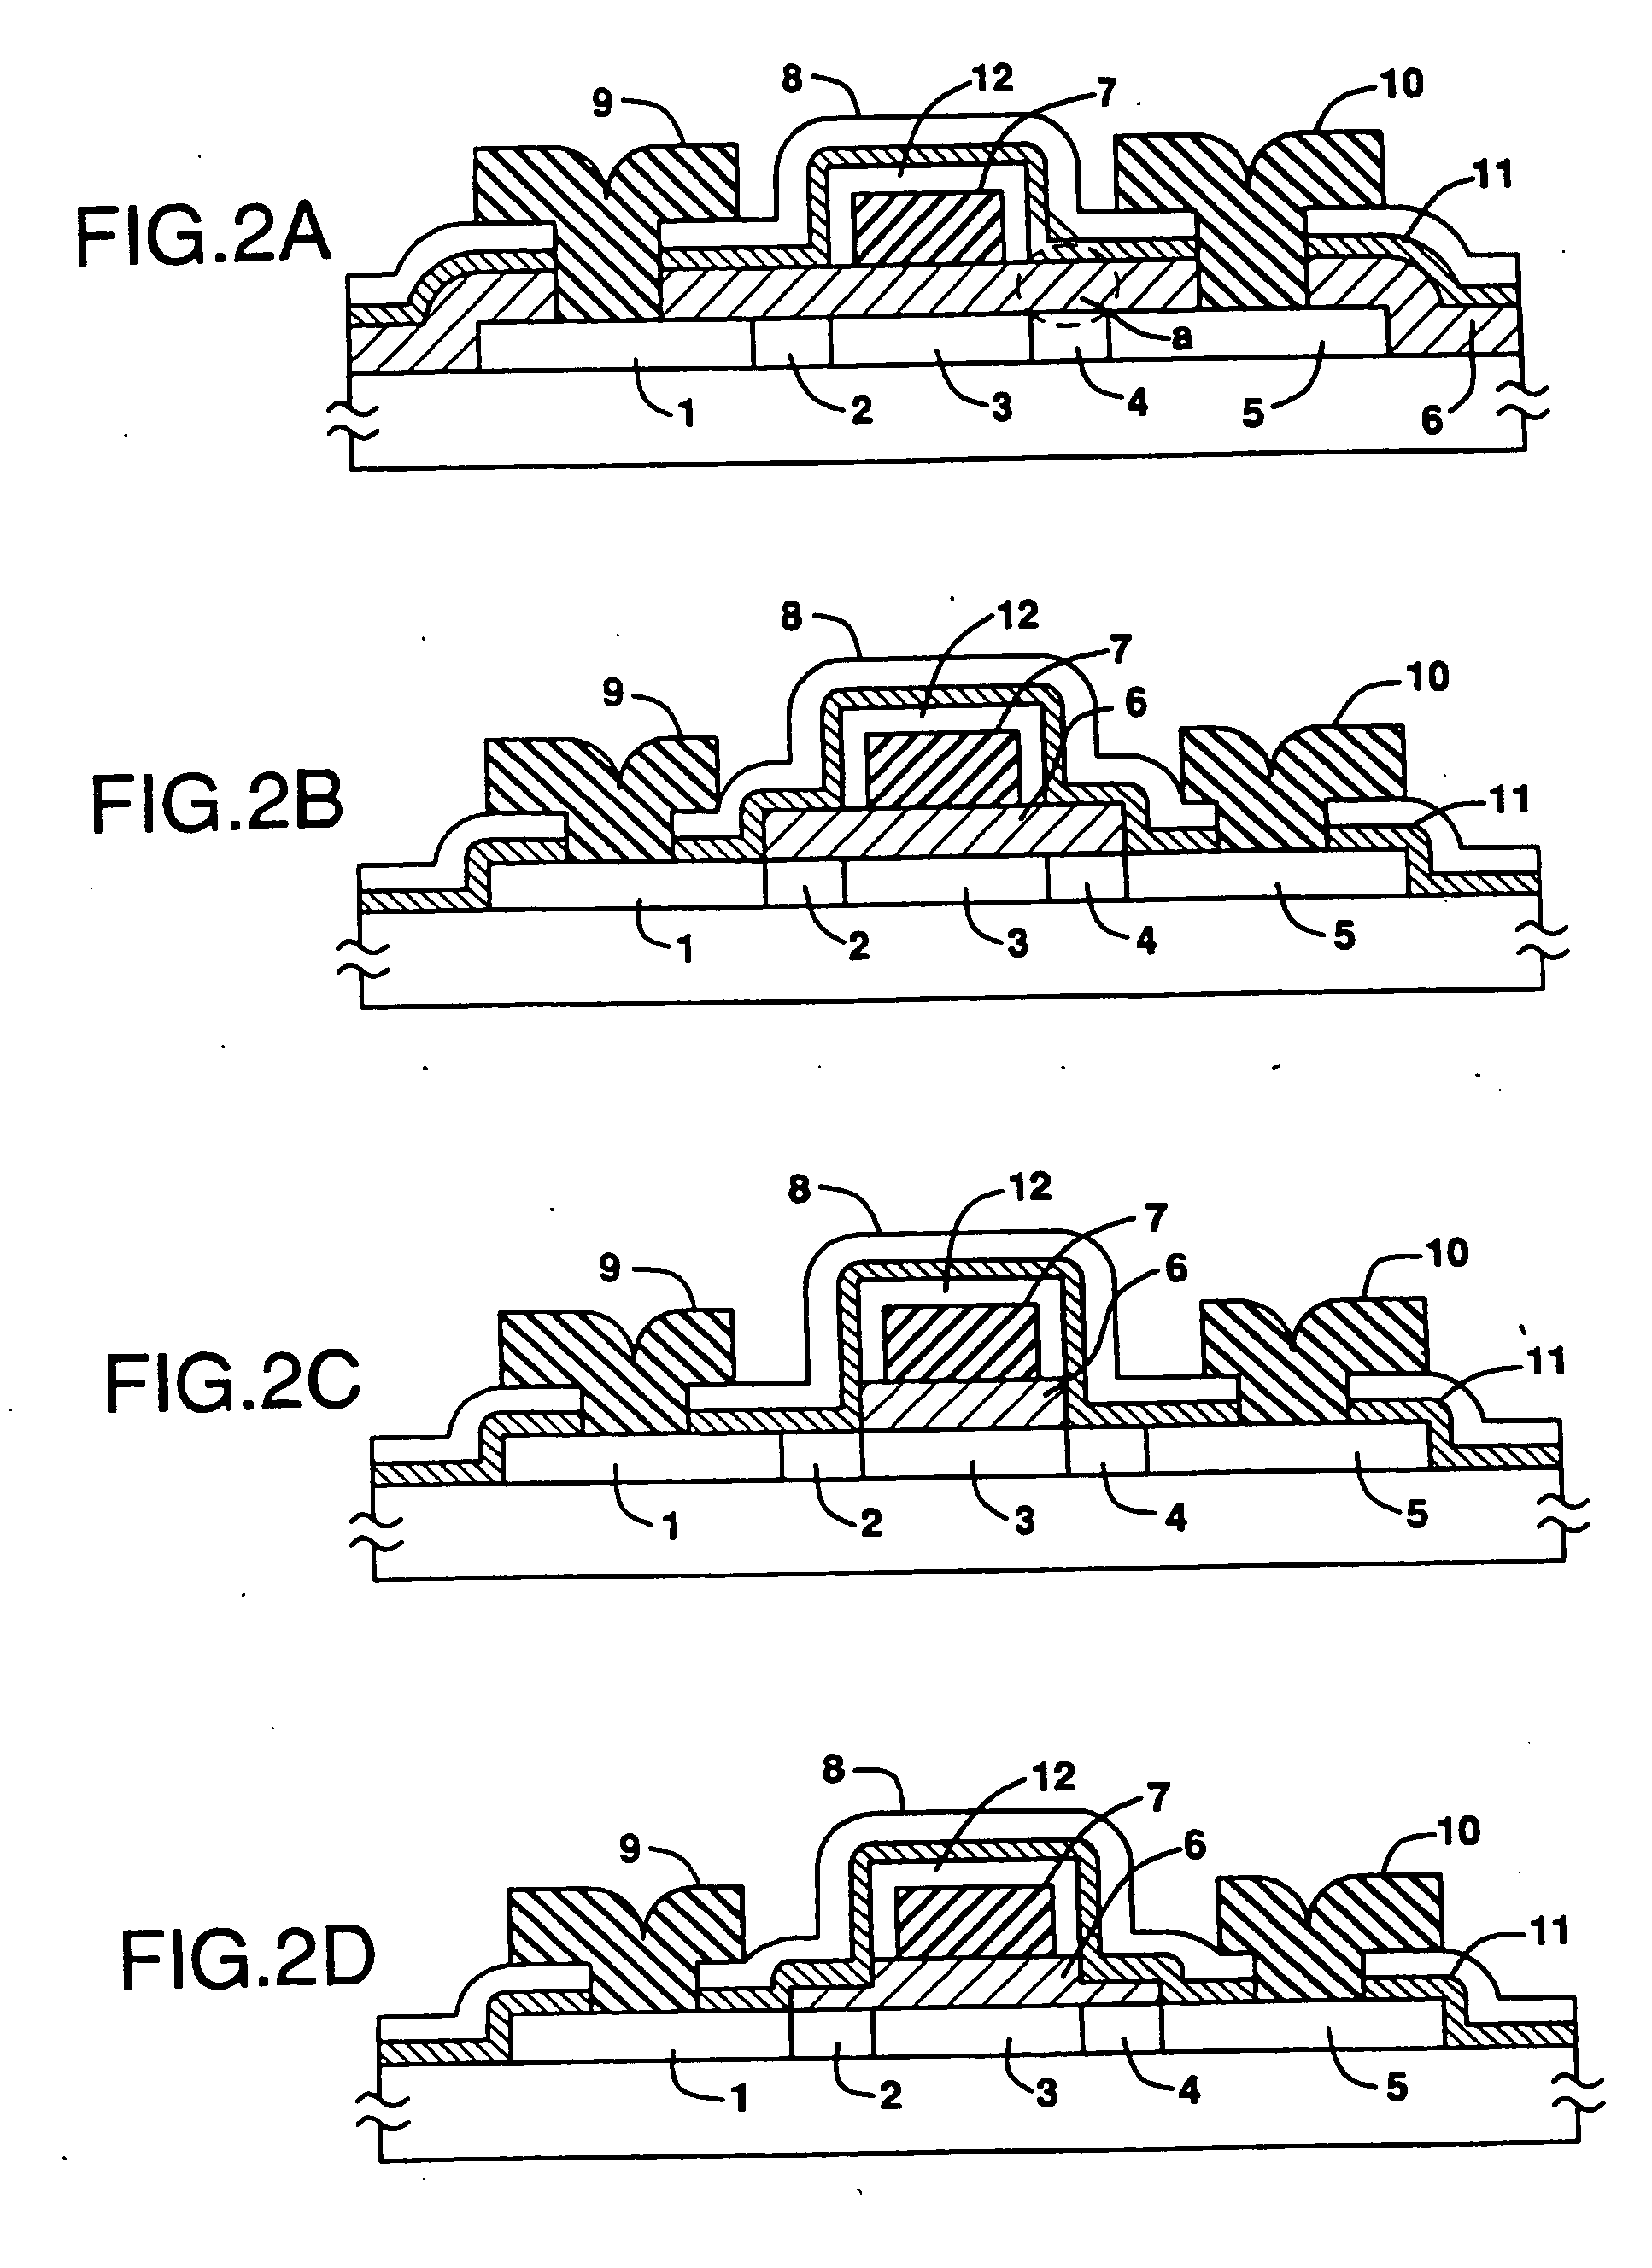 Semiconductor device, and a method for manufacturing the same